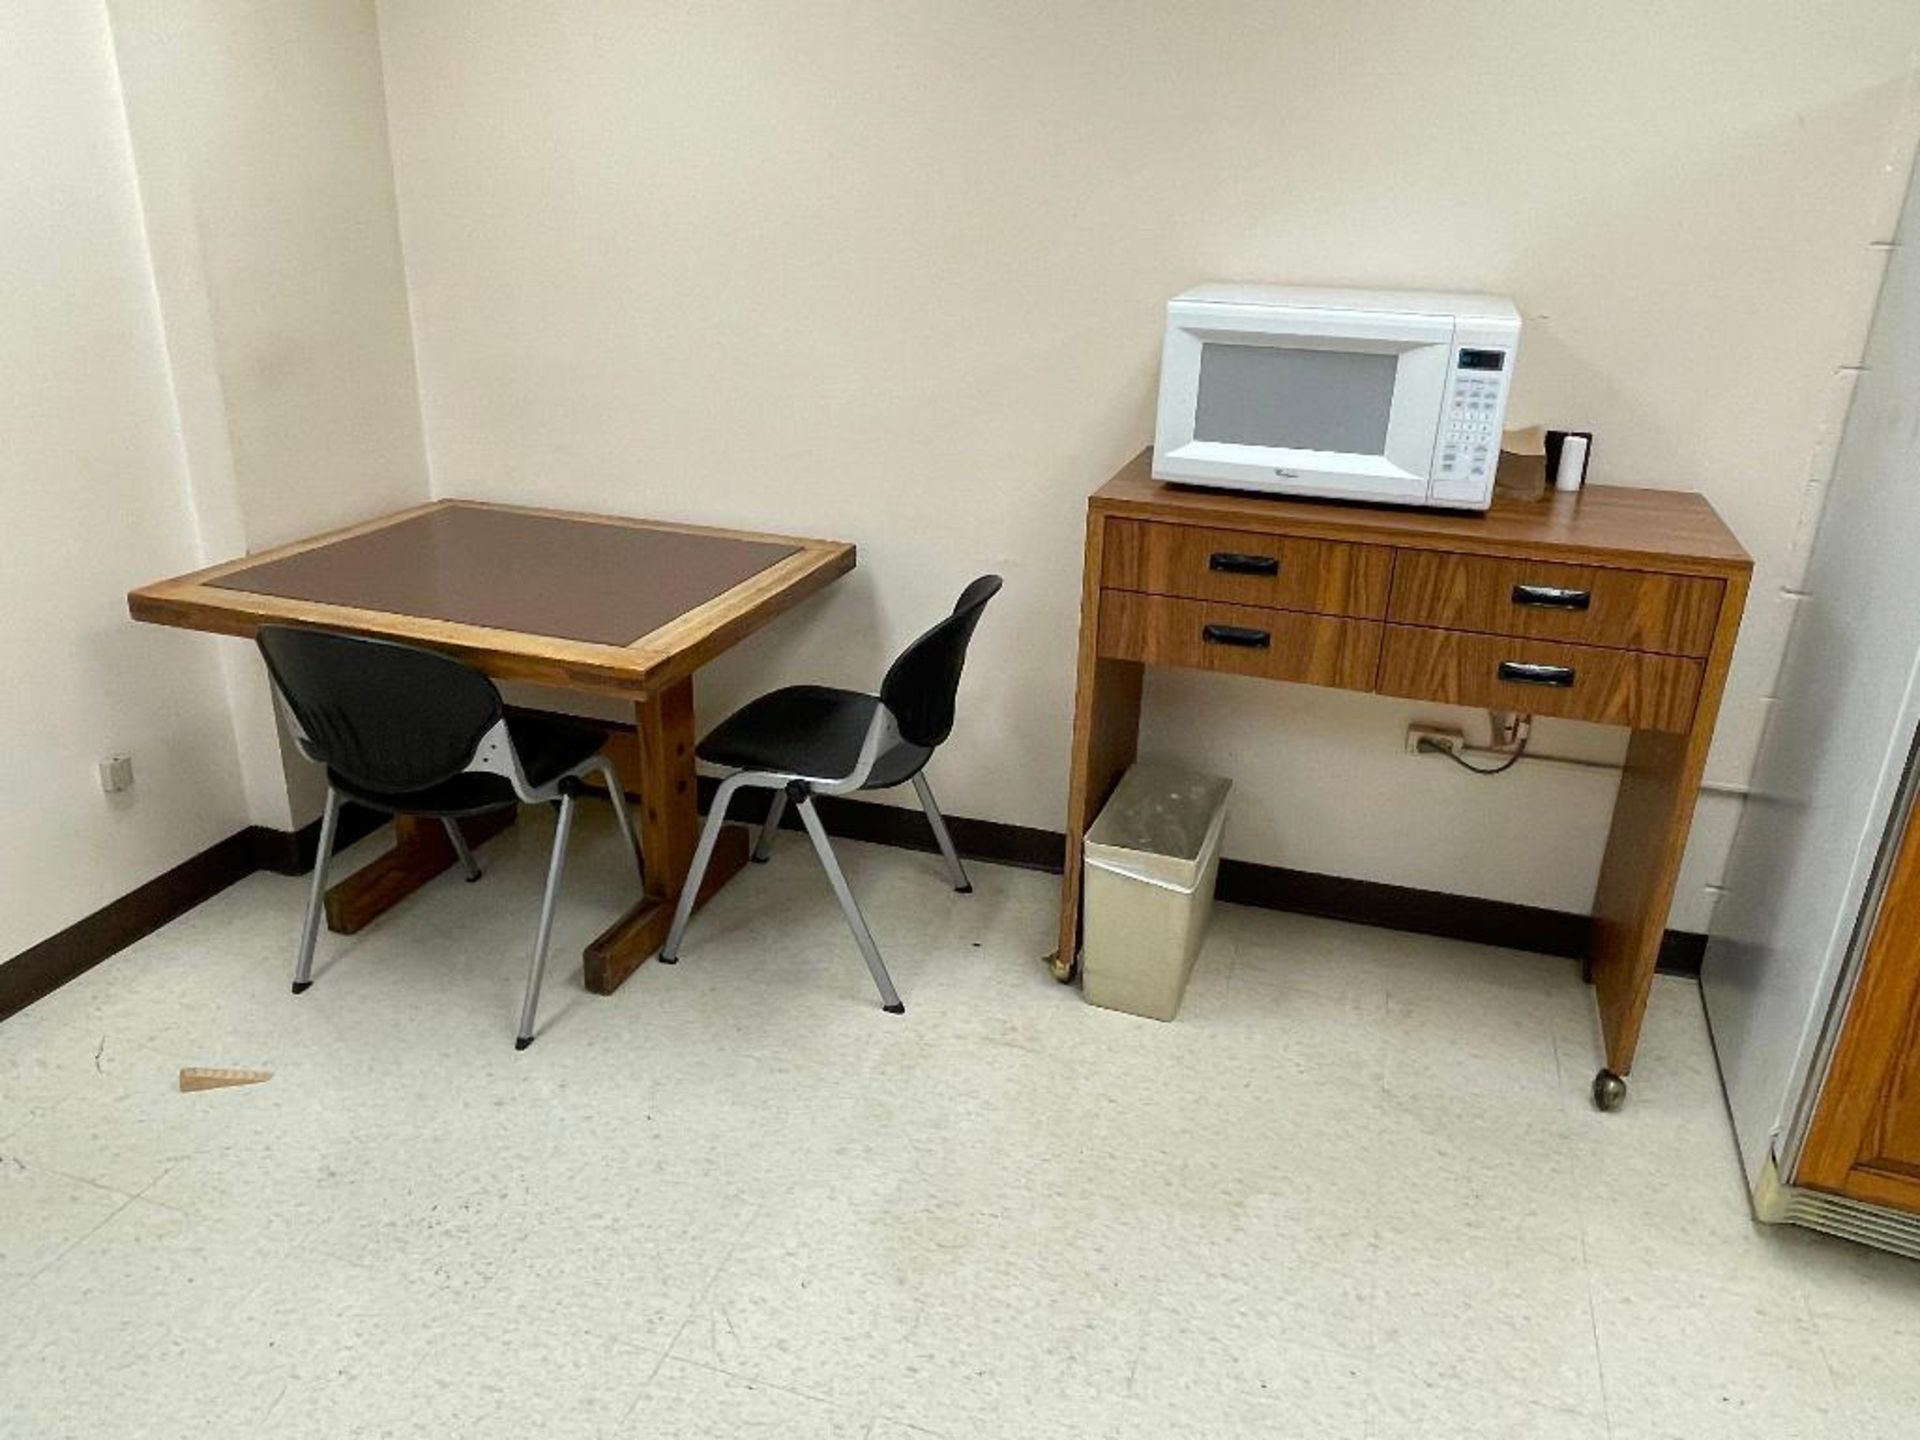 DESCRIPTION: REMAINING CONTENTS OF SNACK ROOM - (2) WOODEN COUCHES, (1) CHAIR, (1) TABLE, AND (2) ST - Image 4 of 5